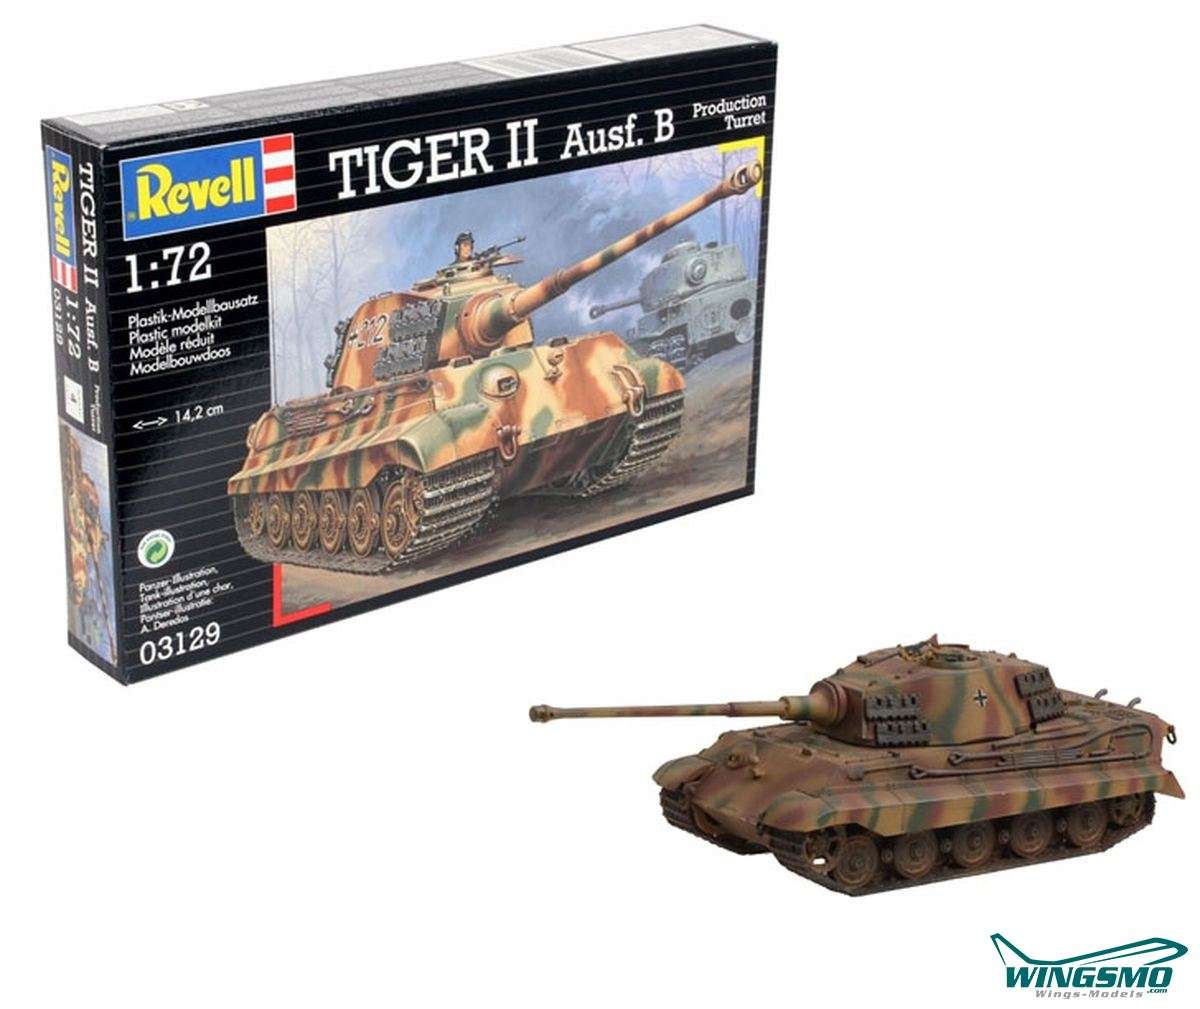 Revell Military Tiger II Asuf. B 1:72 03129